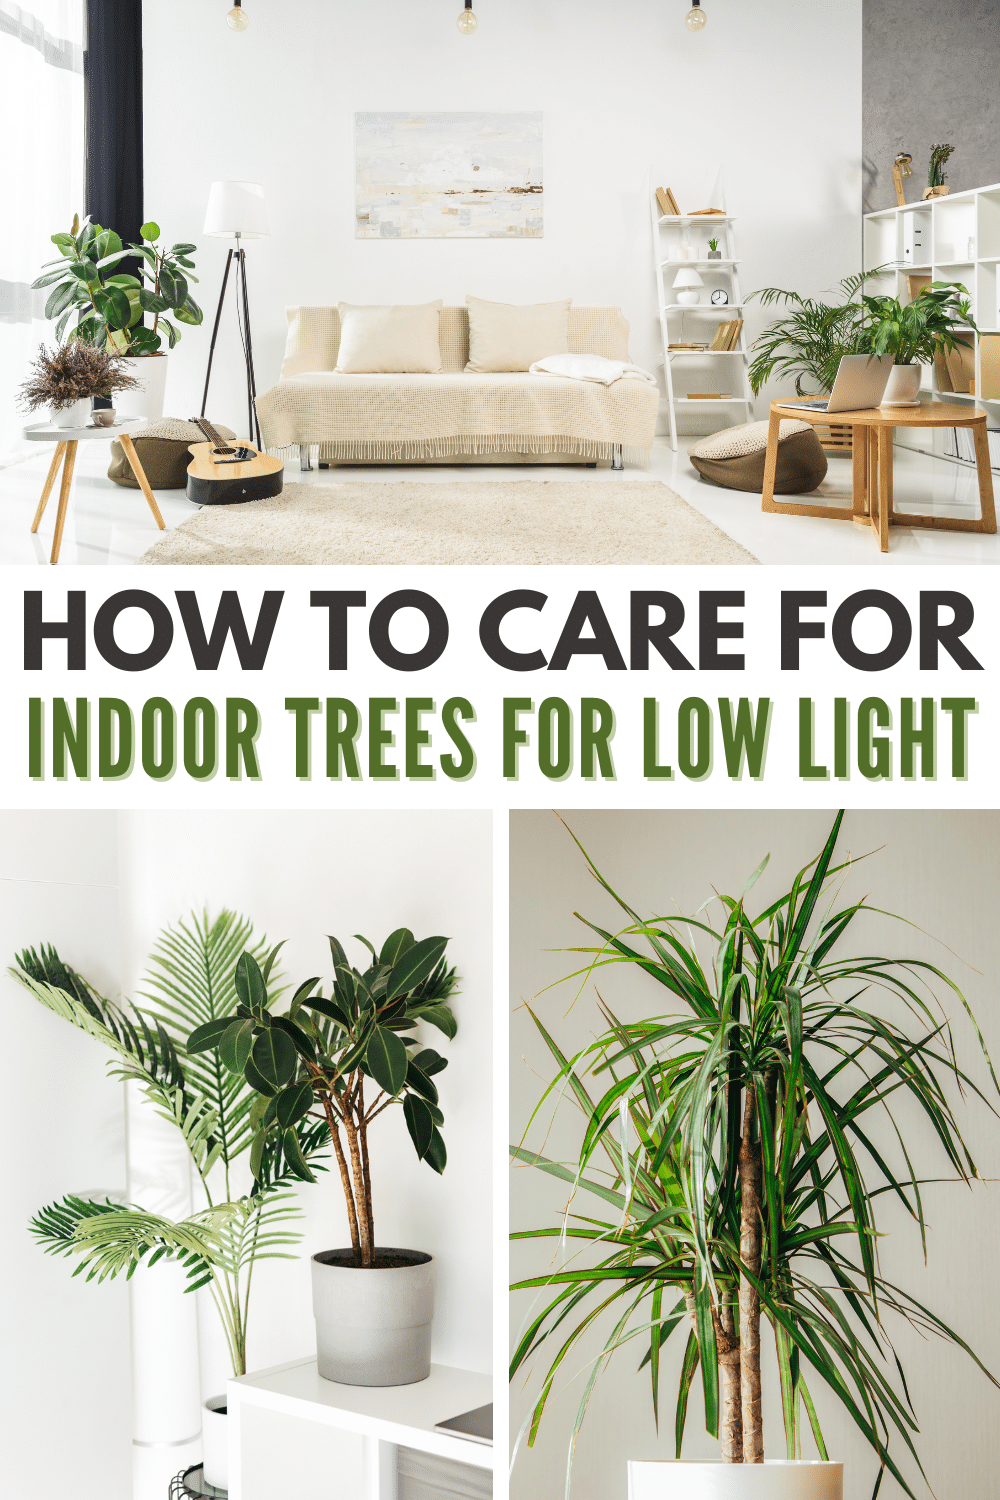 3 images of indoor trees with title text How to care for indoor trees for low light.